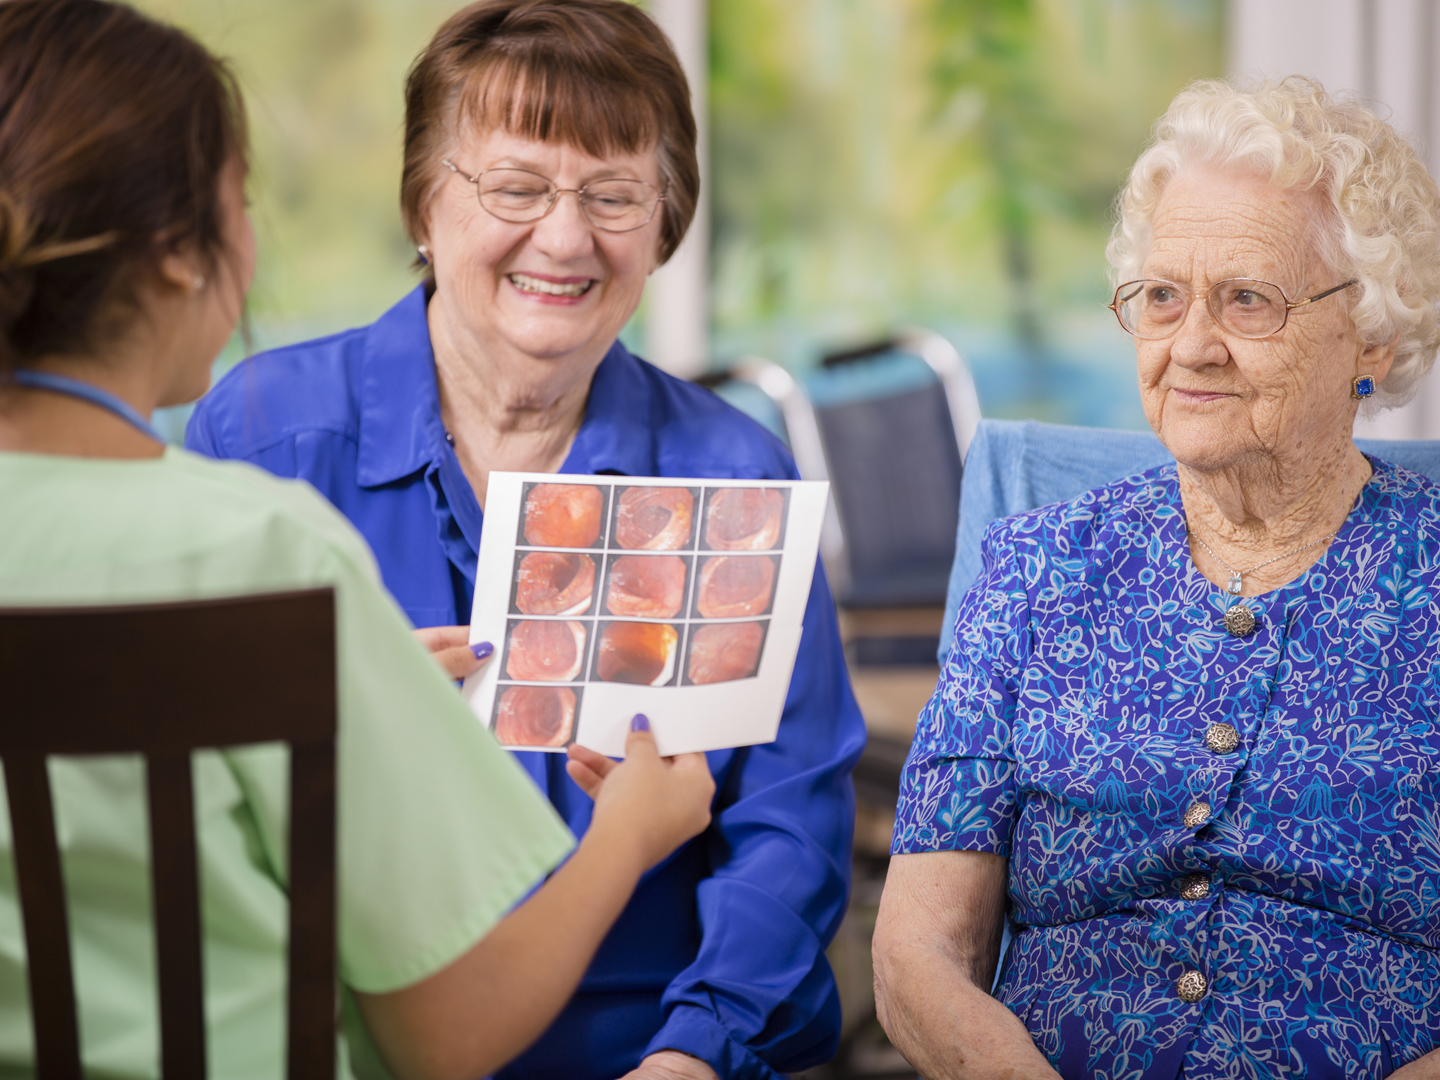 Latin, female doctor or nurse conducts family consultation with elderly patient and her daughter in a nursing home or clinic setting.  They discuss recent colonoscopy results.  Woman is over 100 years old!